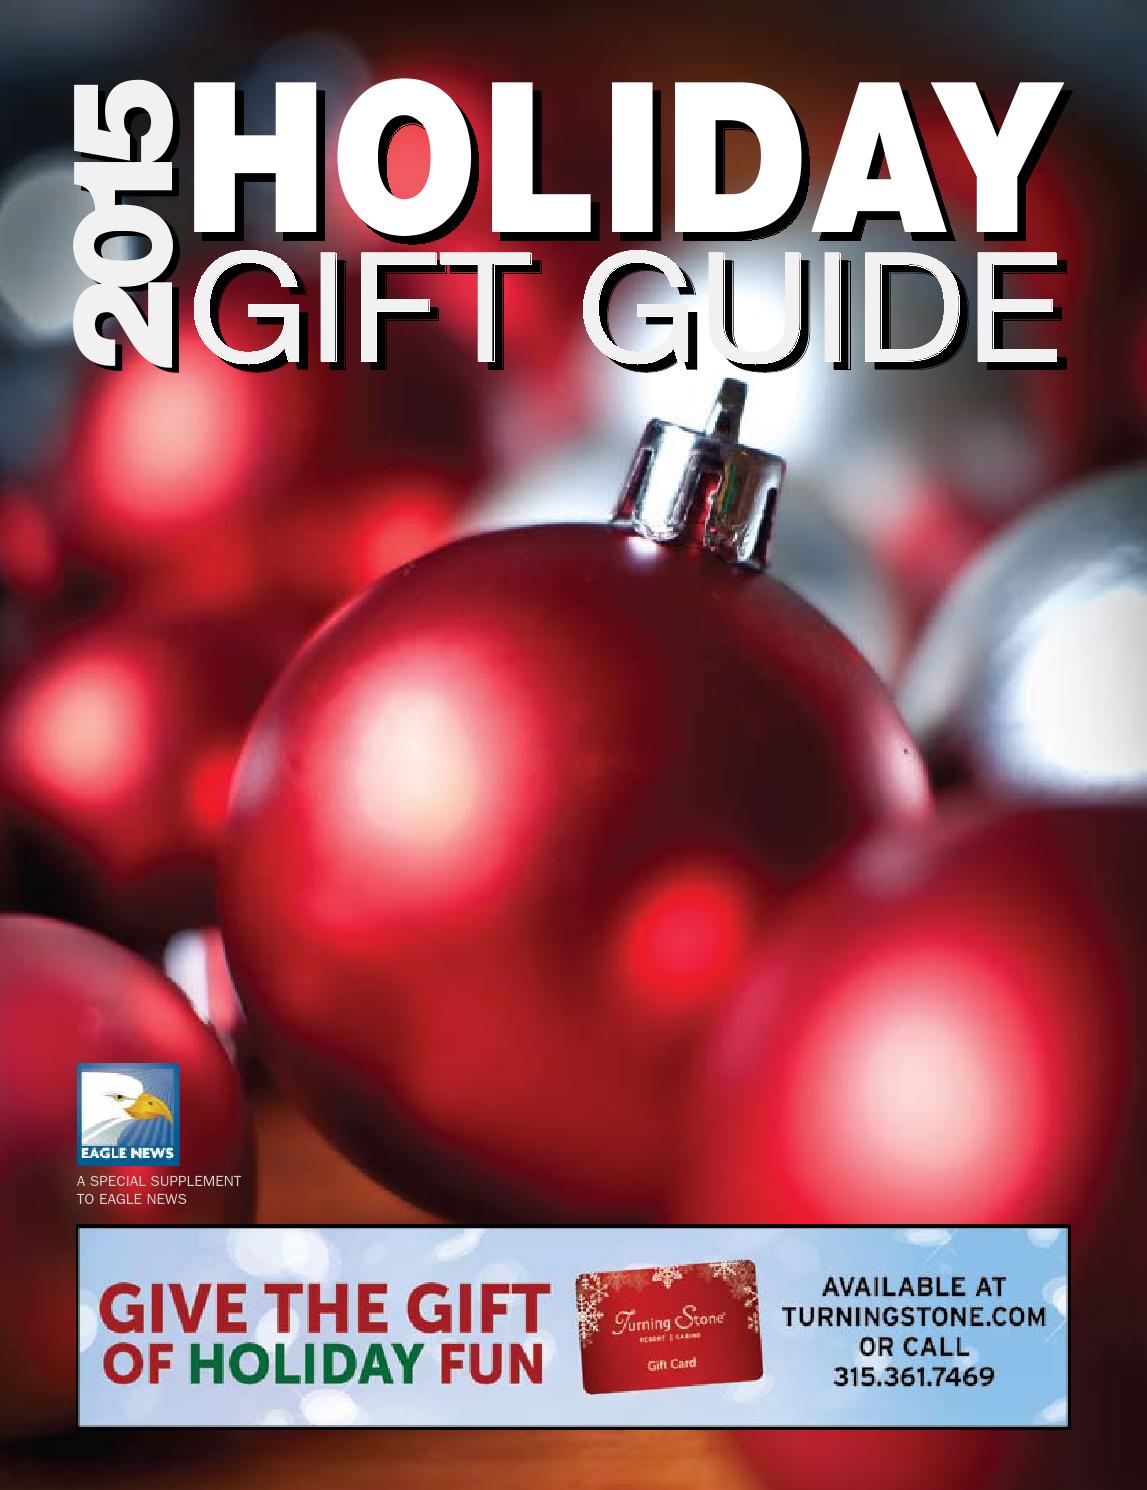 Holiday gift guide 2015